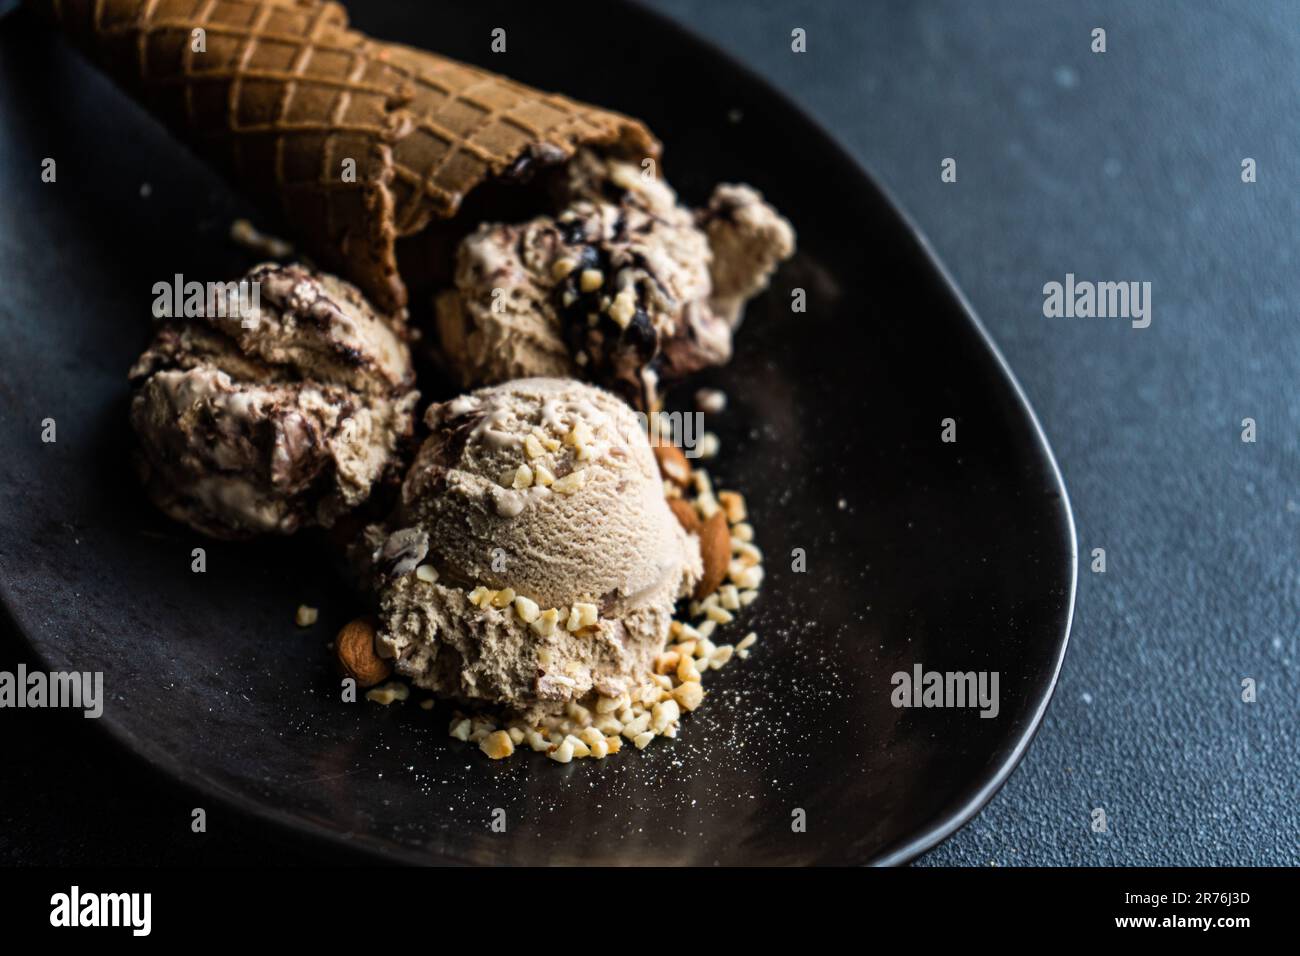 Black ceramic plate with a cone of chocolate ice cream accompanied by two scoops of ice cream with peanuts and walnuts on a dark concrete background Stock Photo